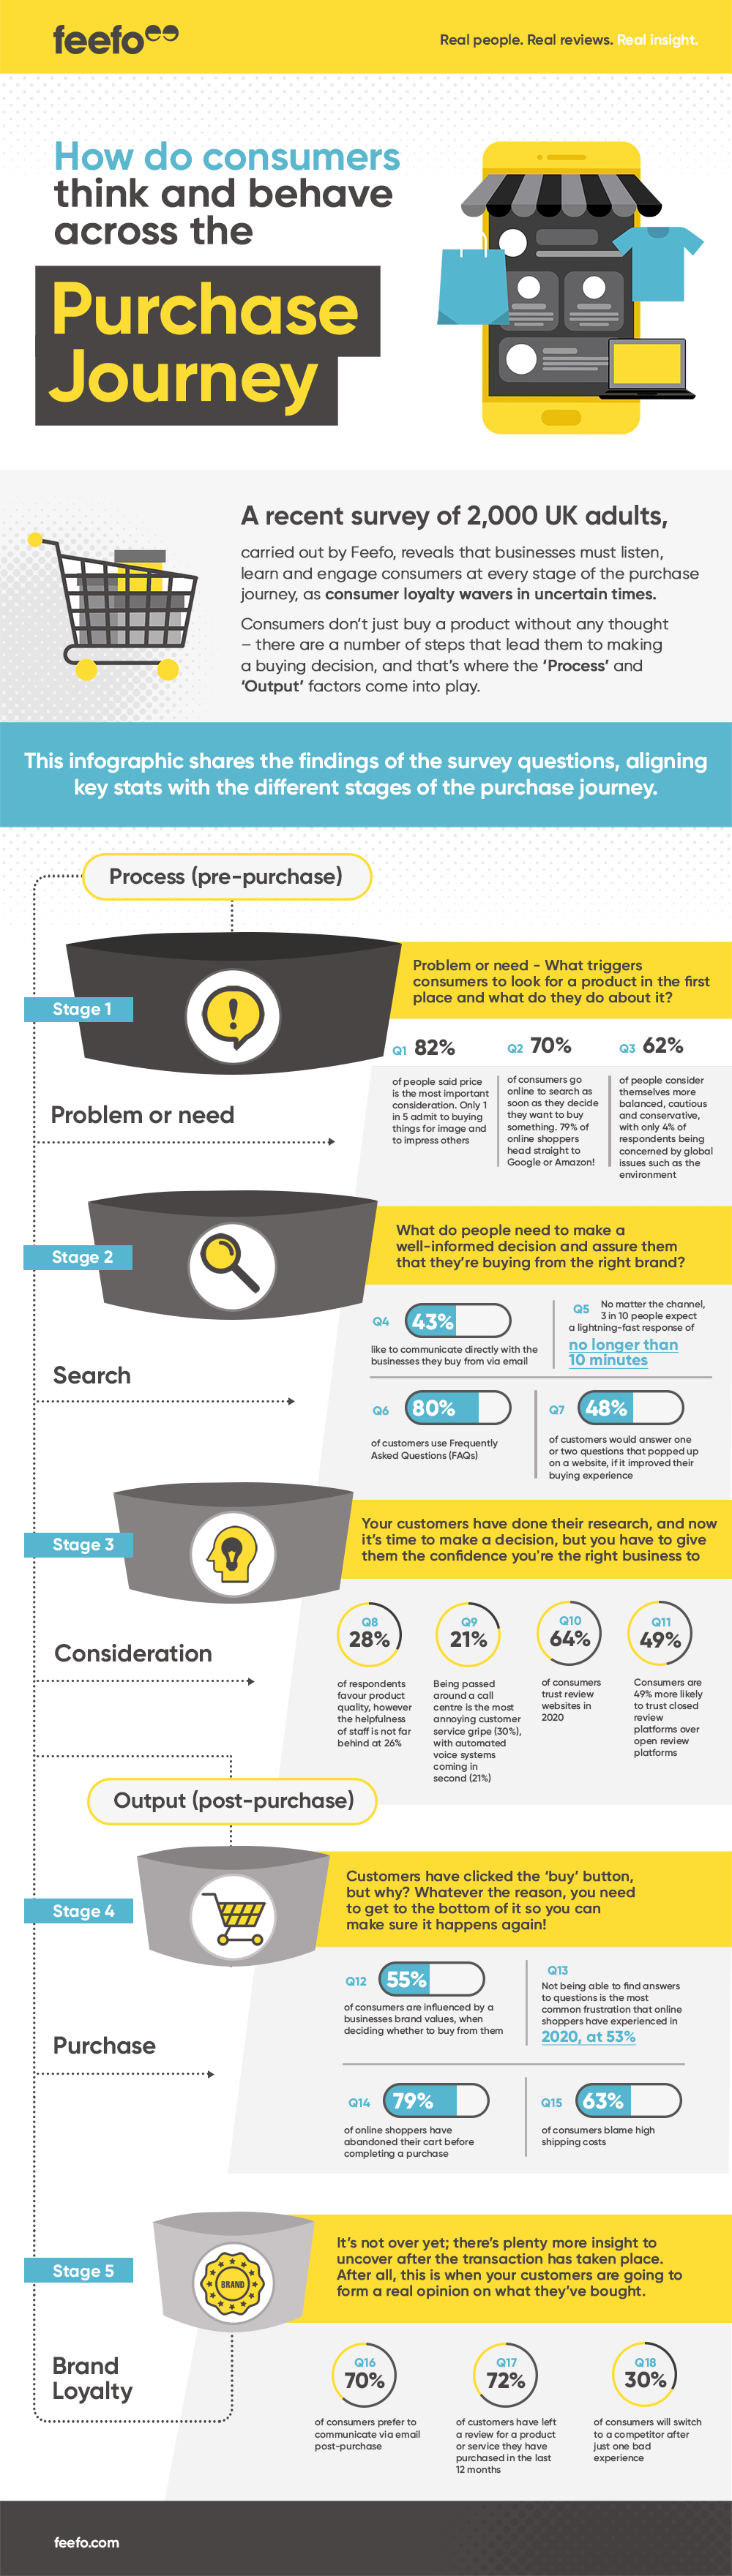 How do consumers think and behave across the purchase journey? [Infographic]